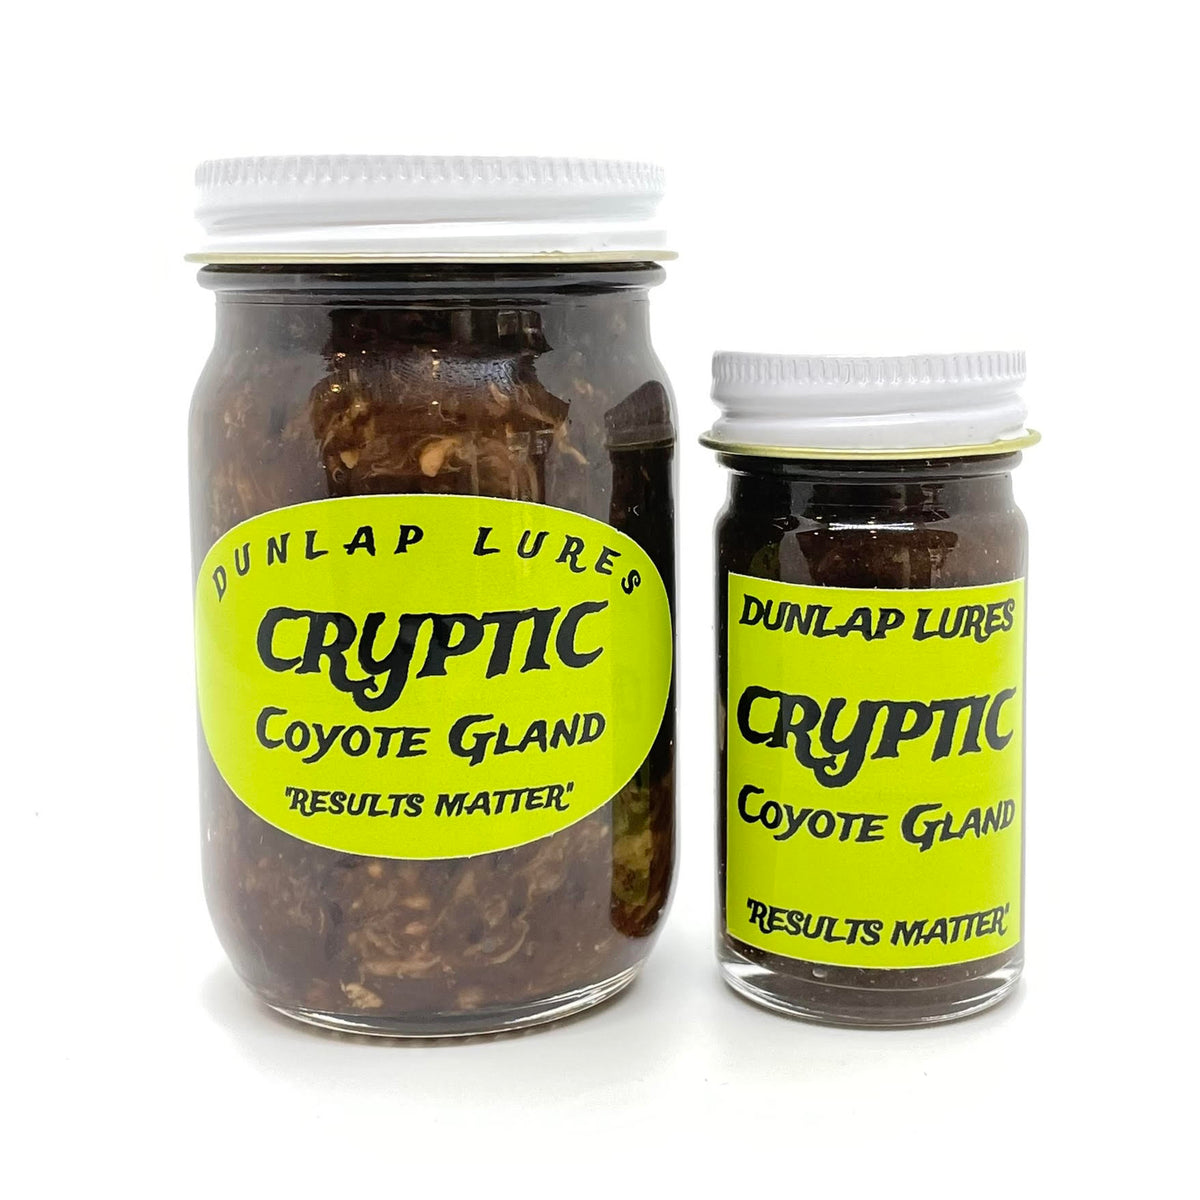 Dunlap's Cryptic Coyote Gland Lure, Size: 1 oz.